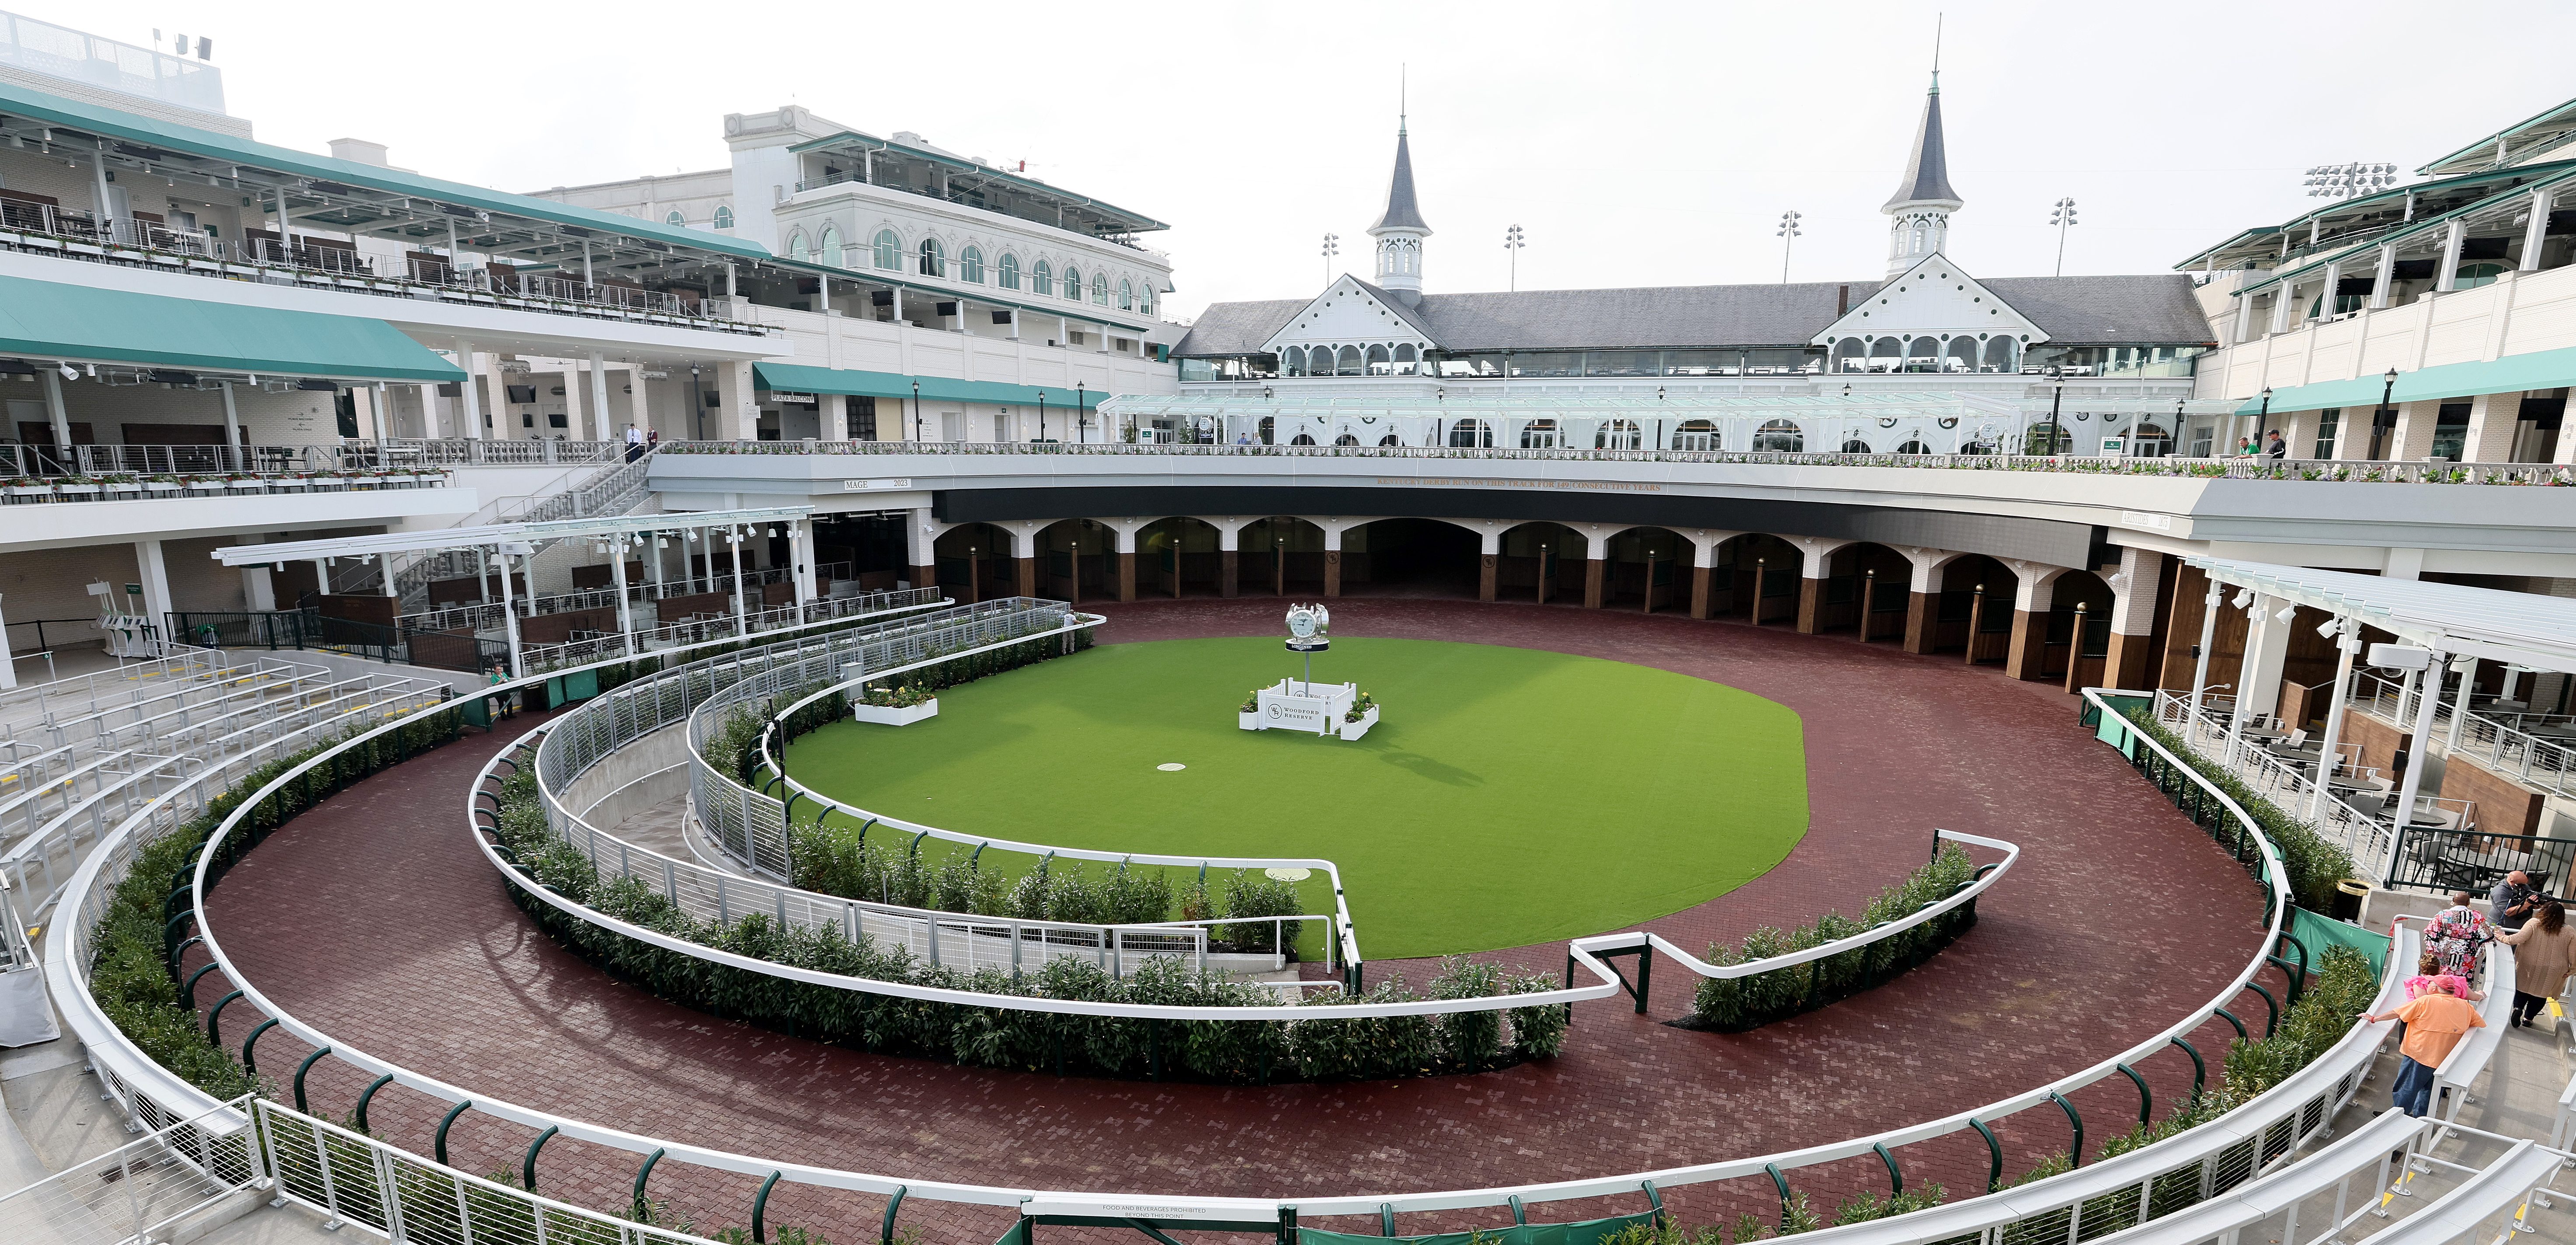 Churchill Downs unveils new $200 million paddock ahead of 150th
Kentucky Derby